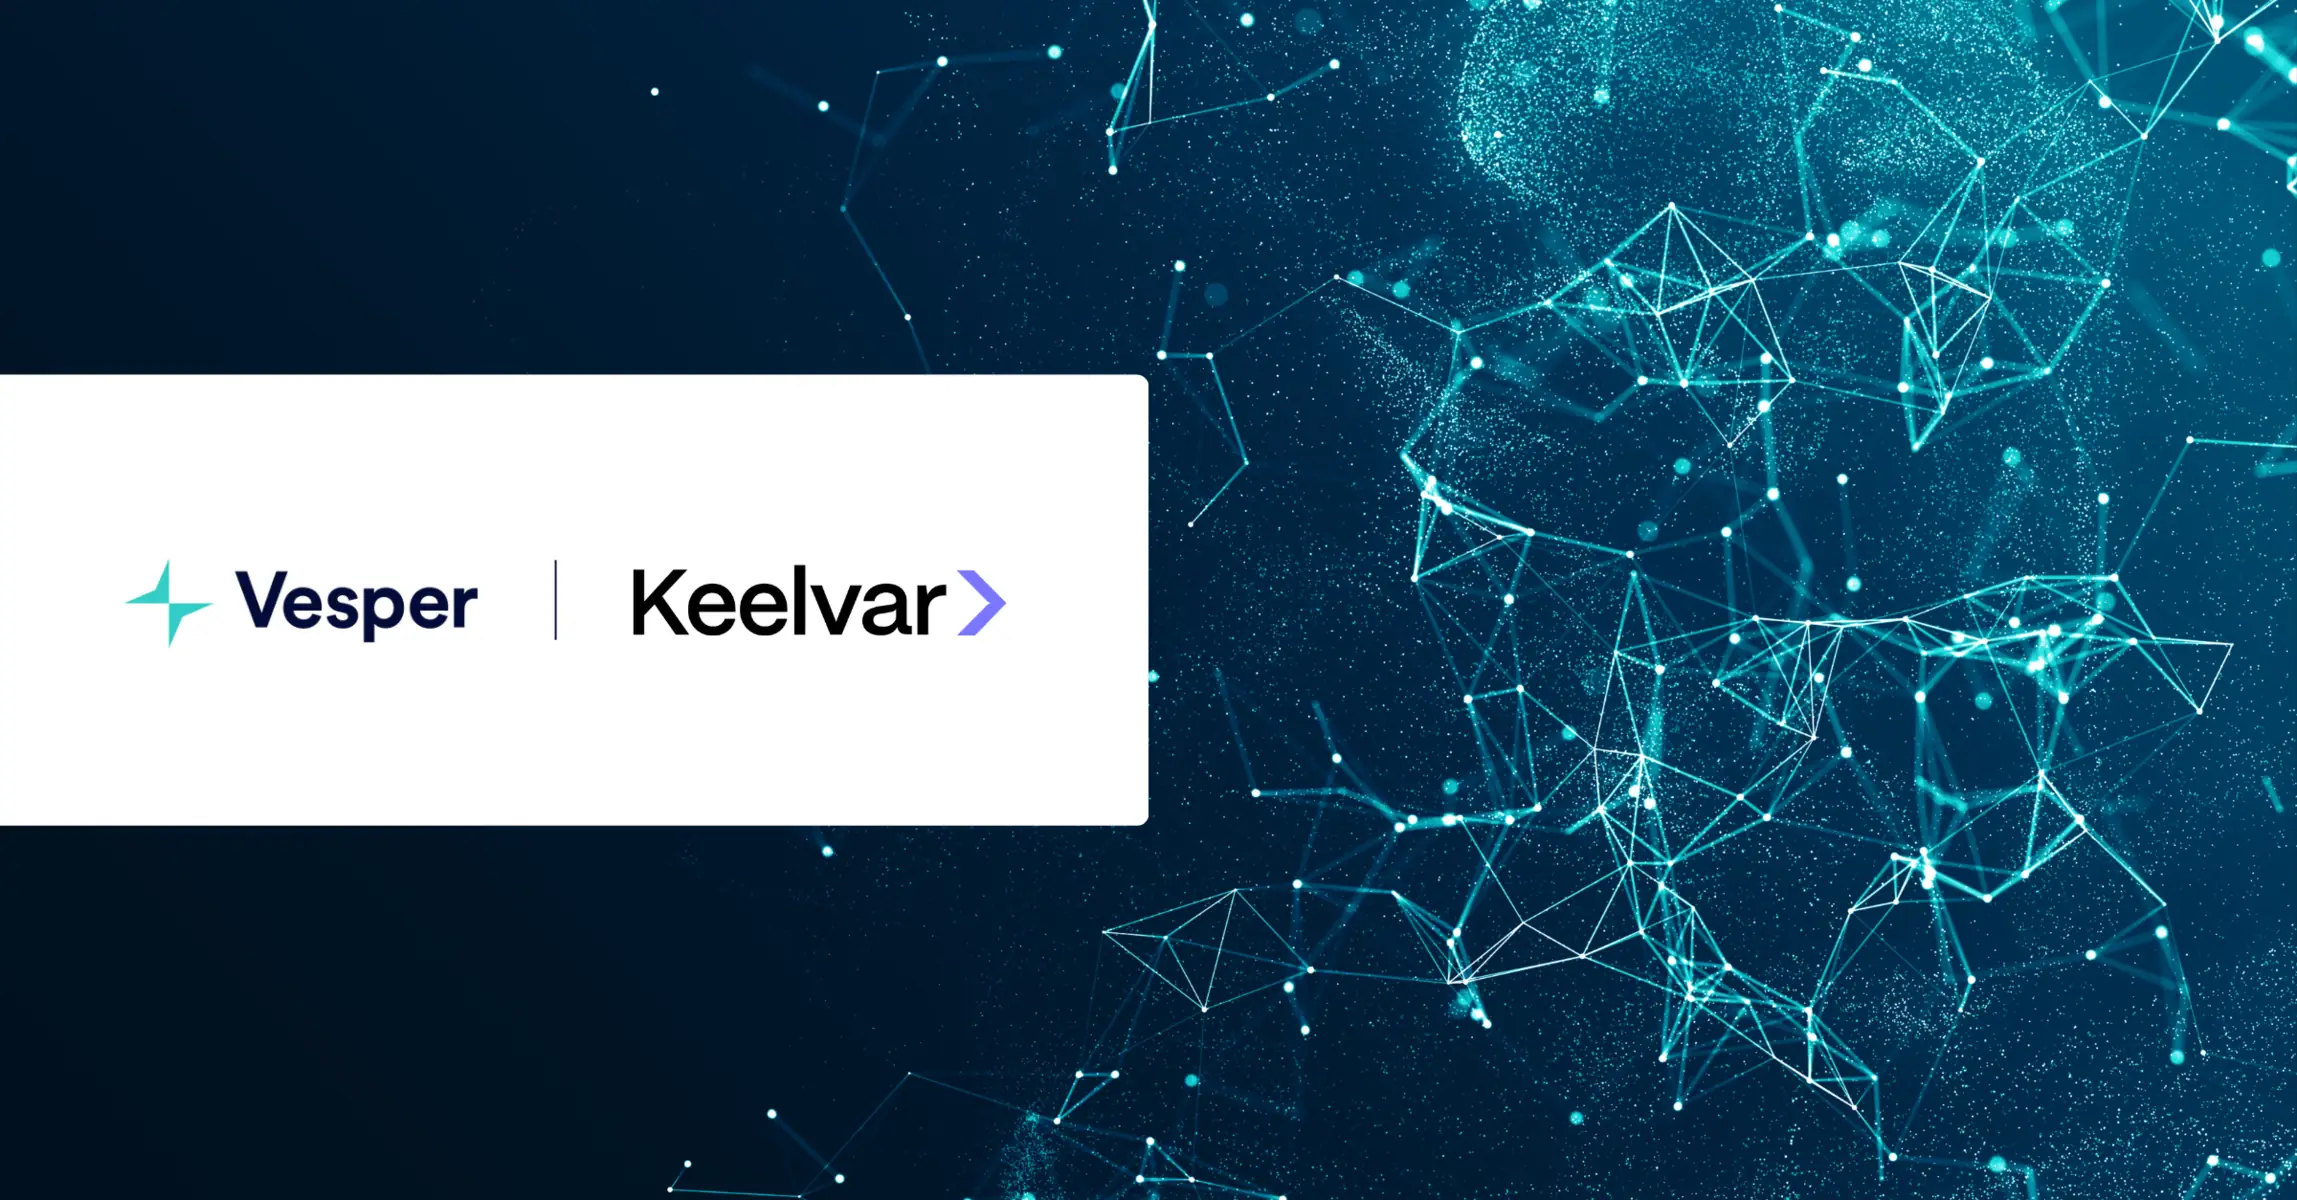 Image showcasing Vesper's partnership with Keelvar, two company logos side by side.